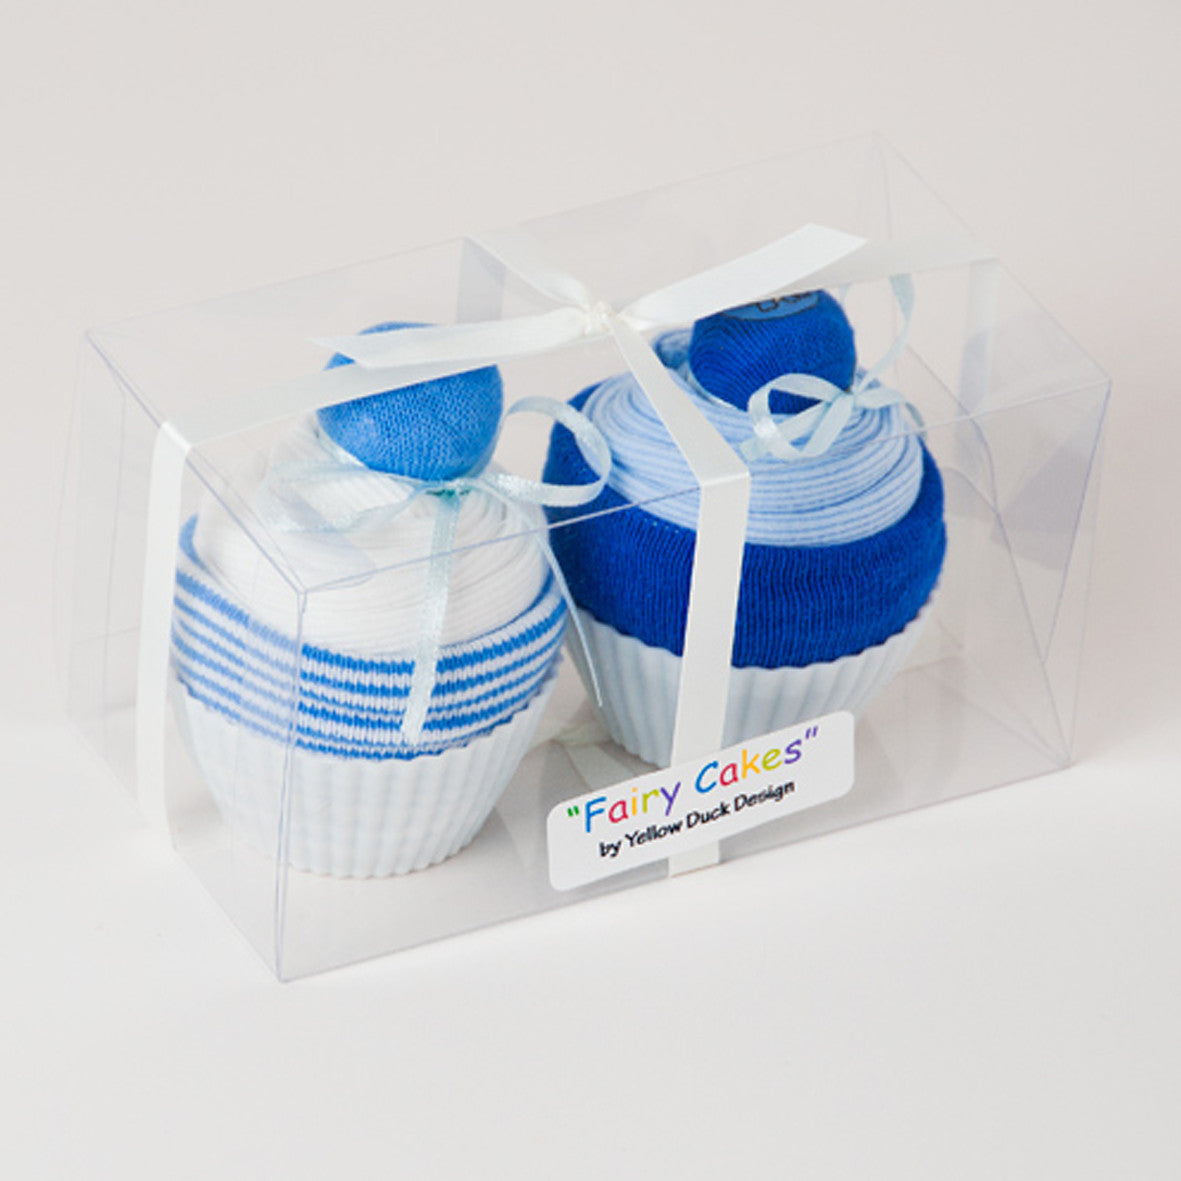 twin baby boy gift two blue cup cakes gift boxed